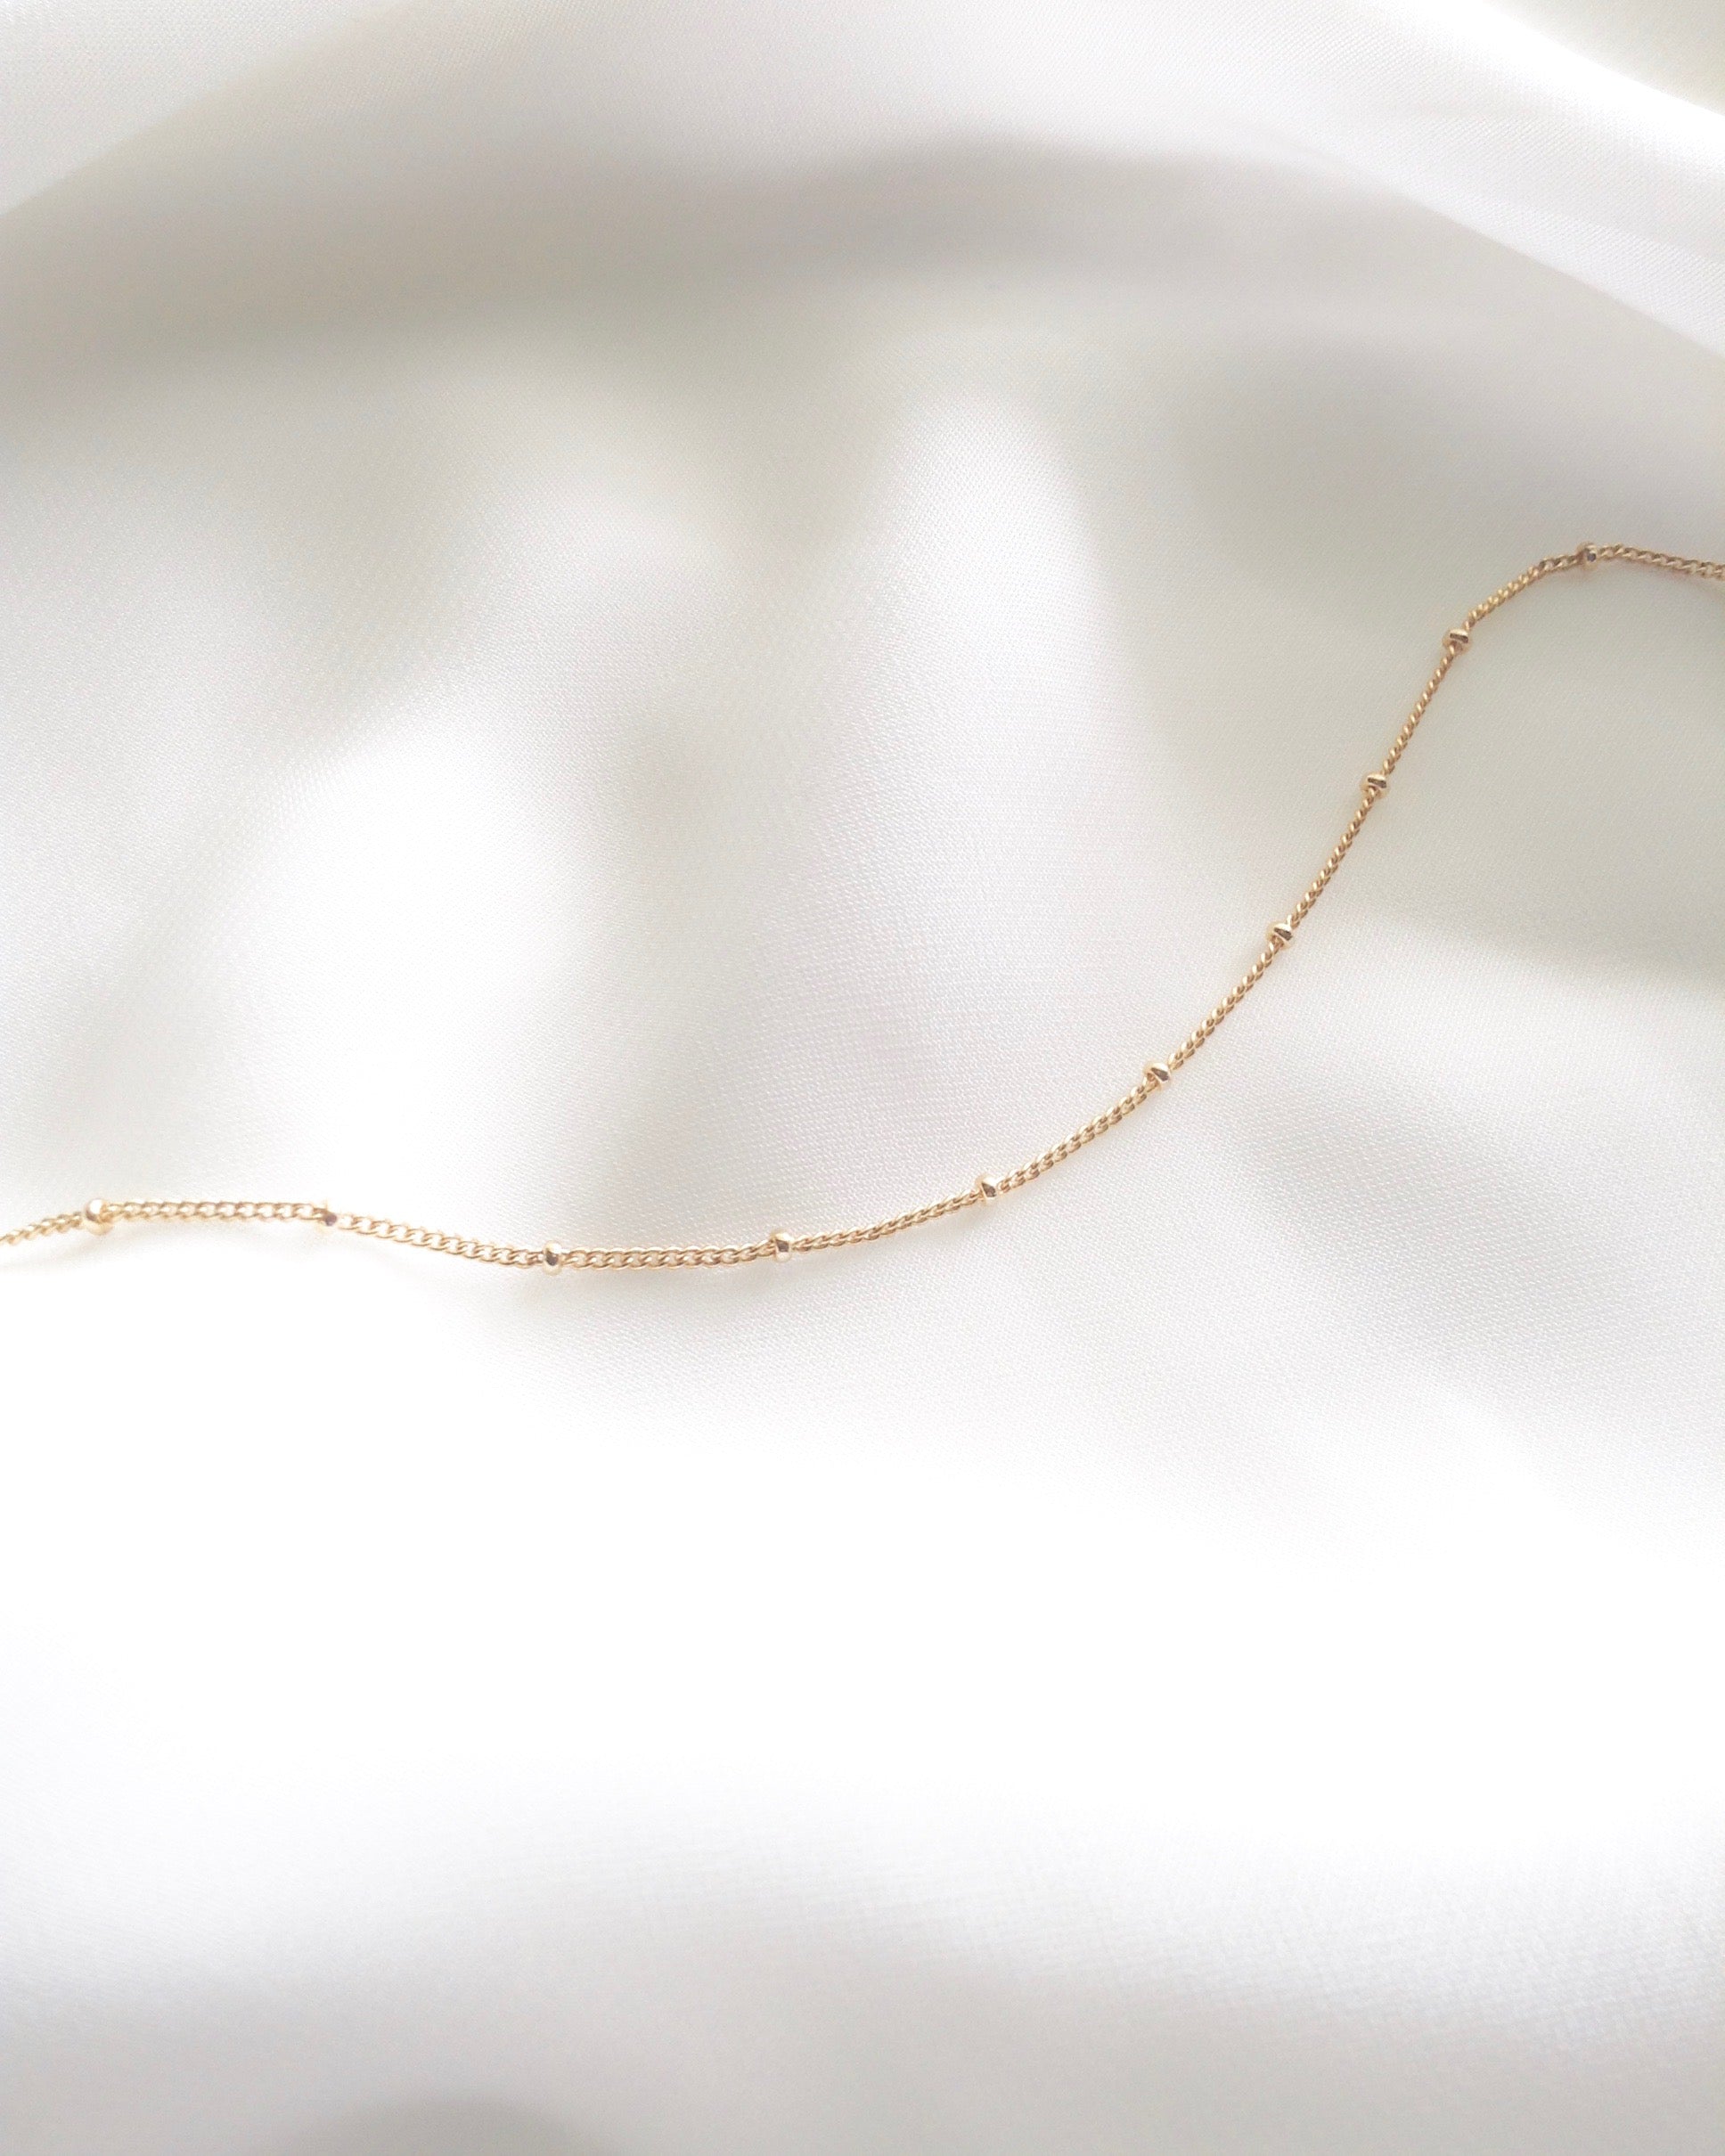 Delicate Thin Chain Bracelet in Gold Filled or Sterling Silver | IB Jewelry